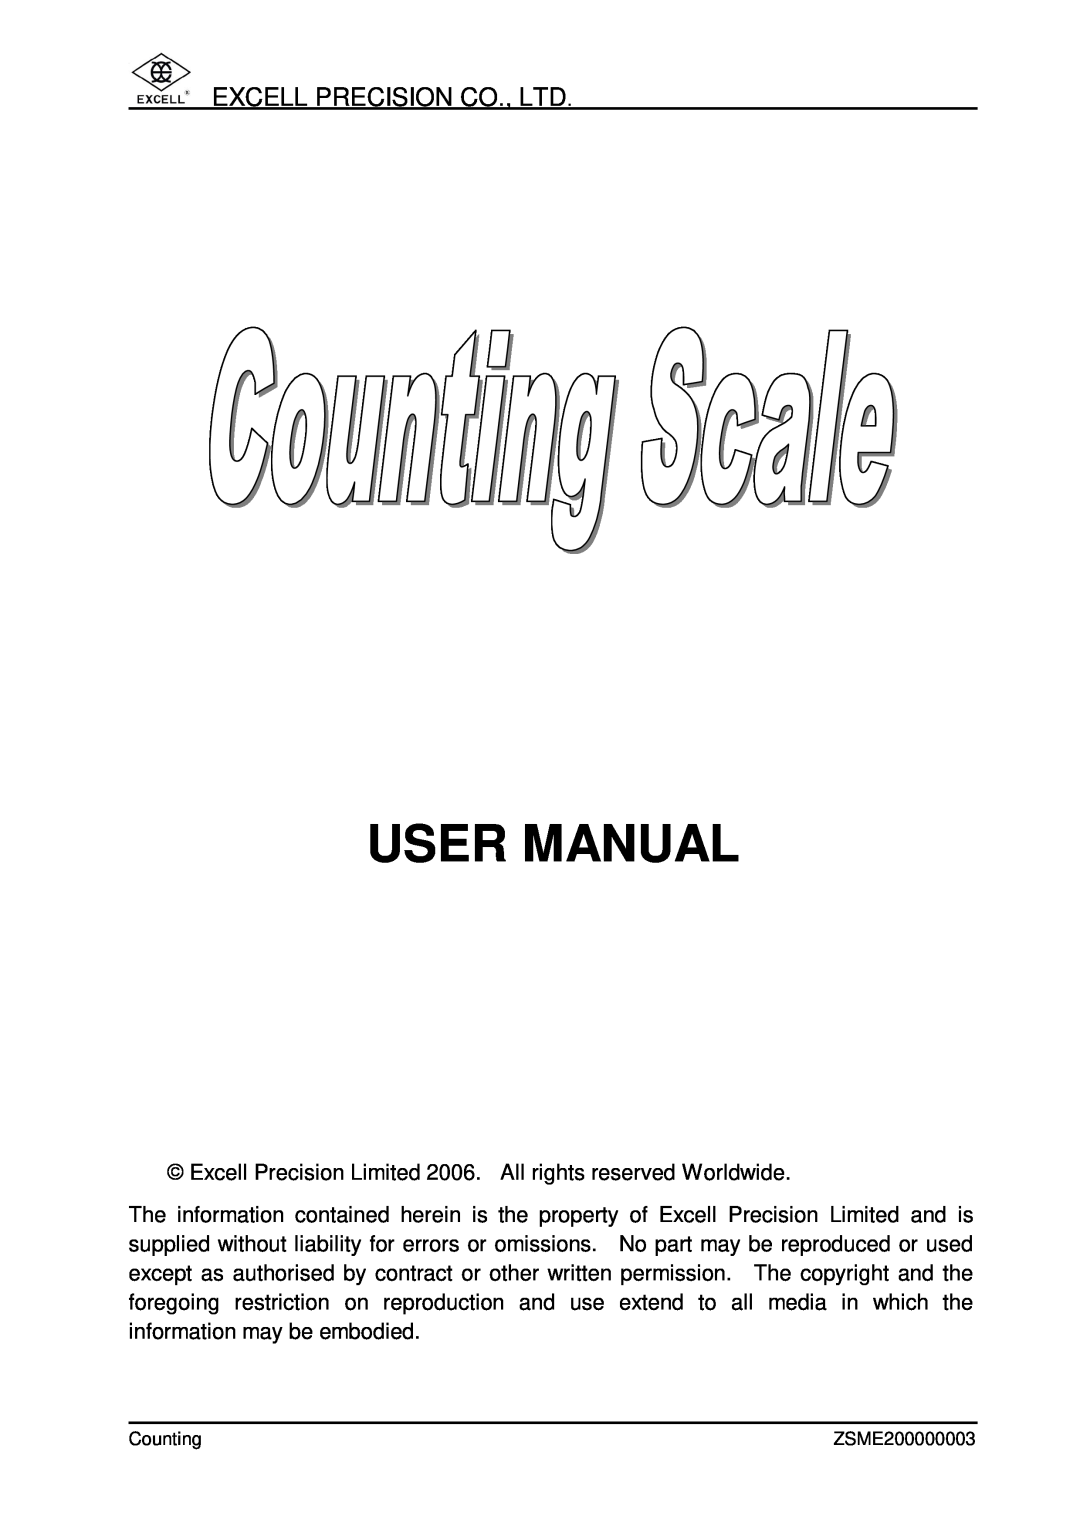 Excell Precision Counting Scale user manual User Manual 